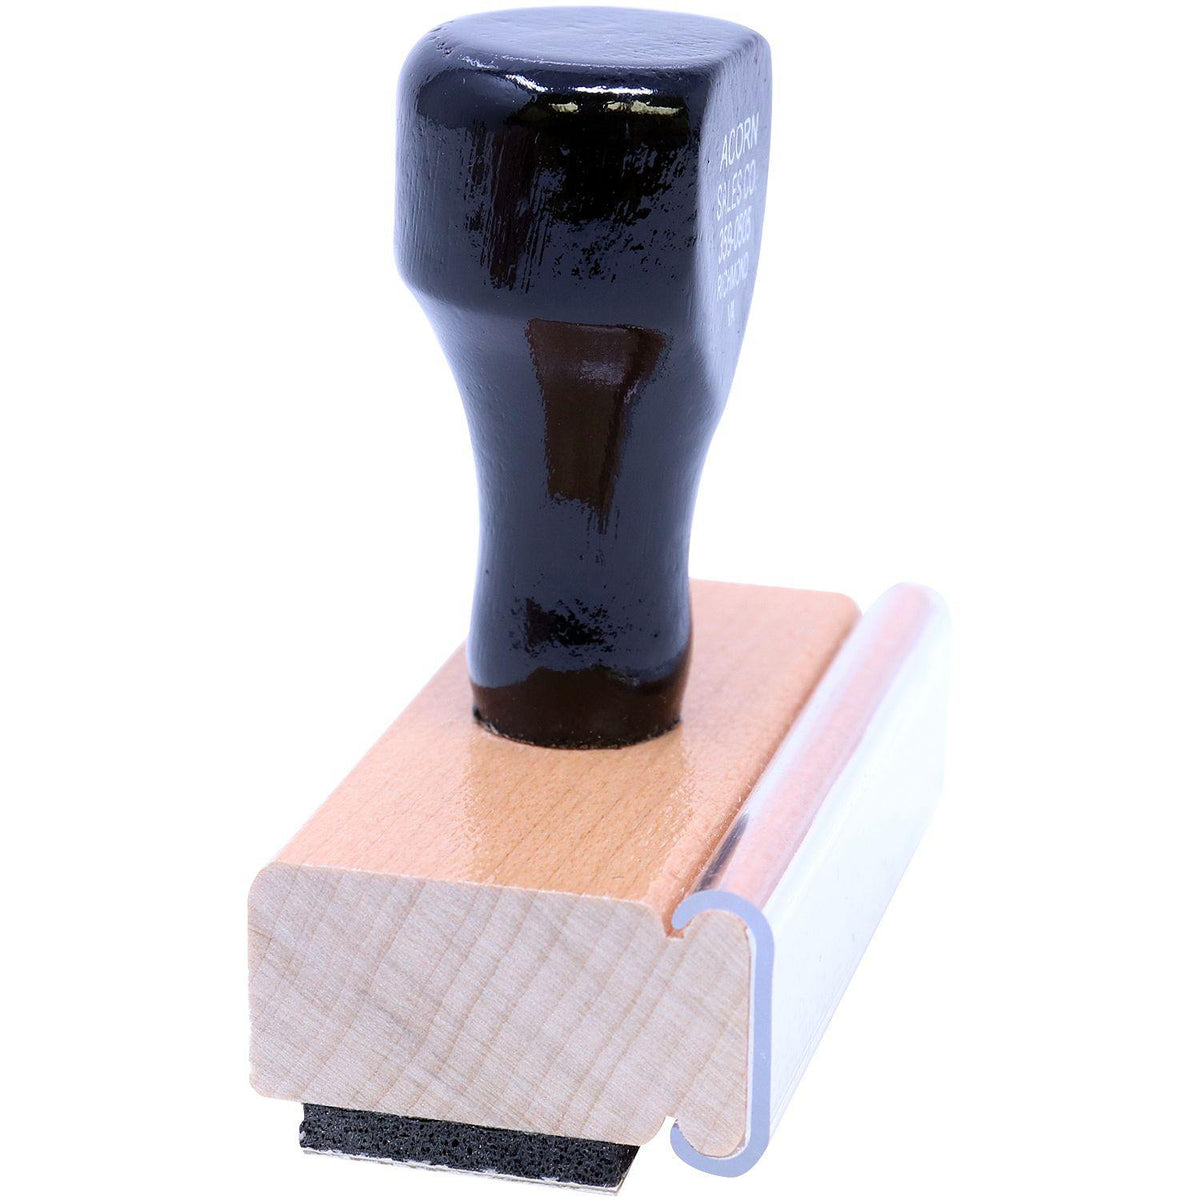 Side View of Bold Allergies Rubber Stamp at an Angle